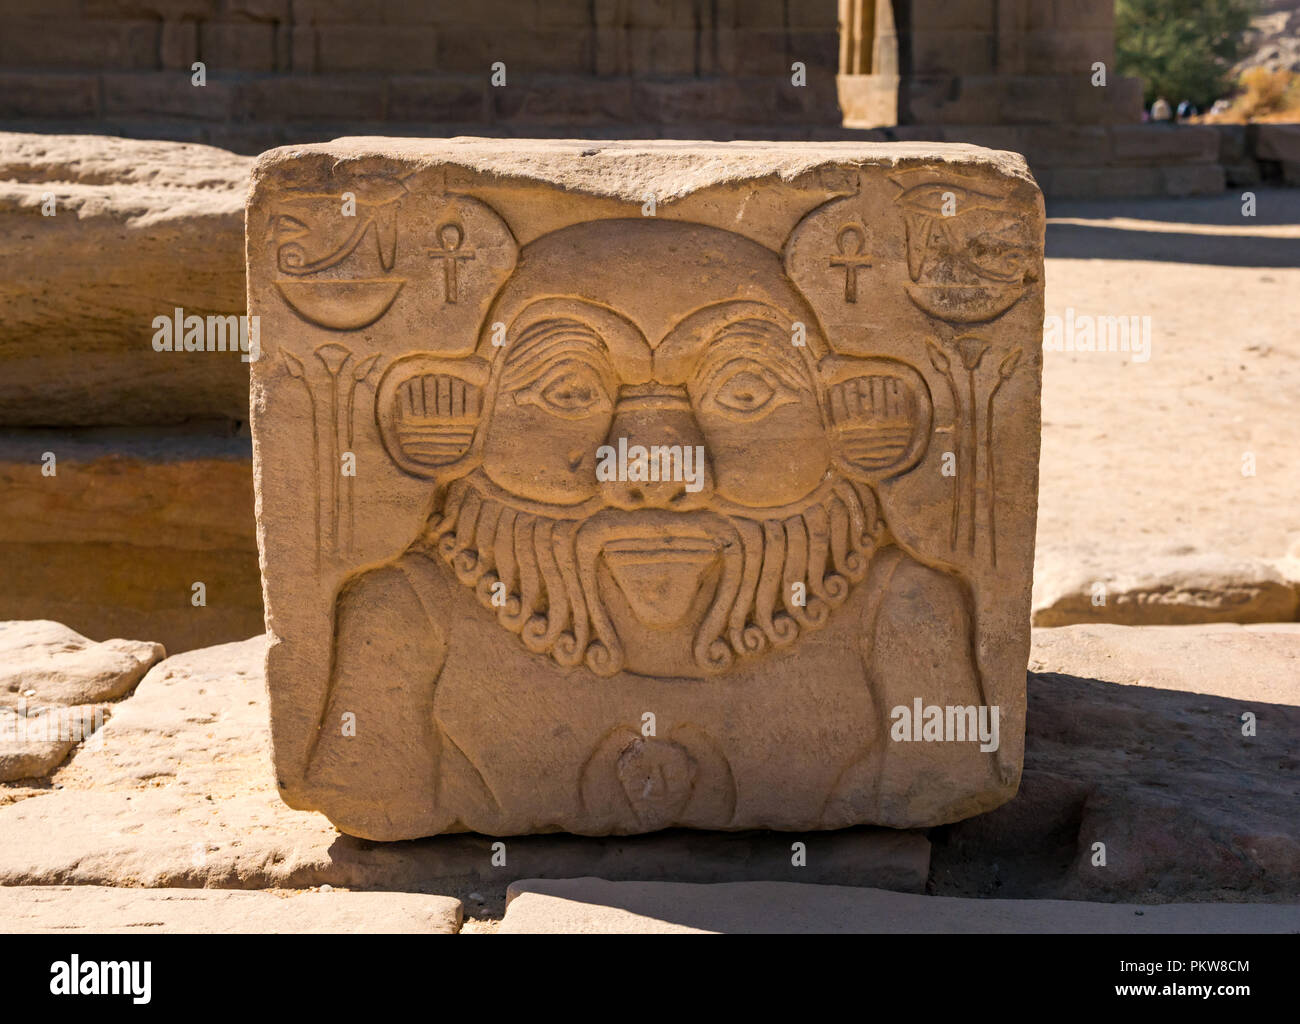 Unusual carving on stone of male face  with curly beard on stone, Temple of Philae, River Nile, Aswan, Egypt, Africa Stock Photo